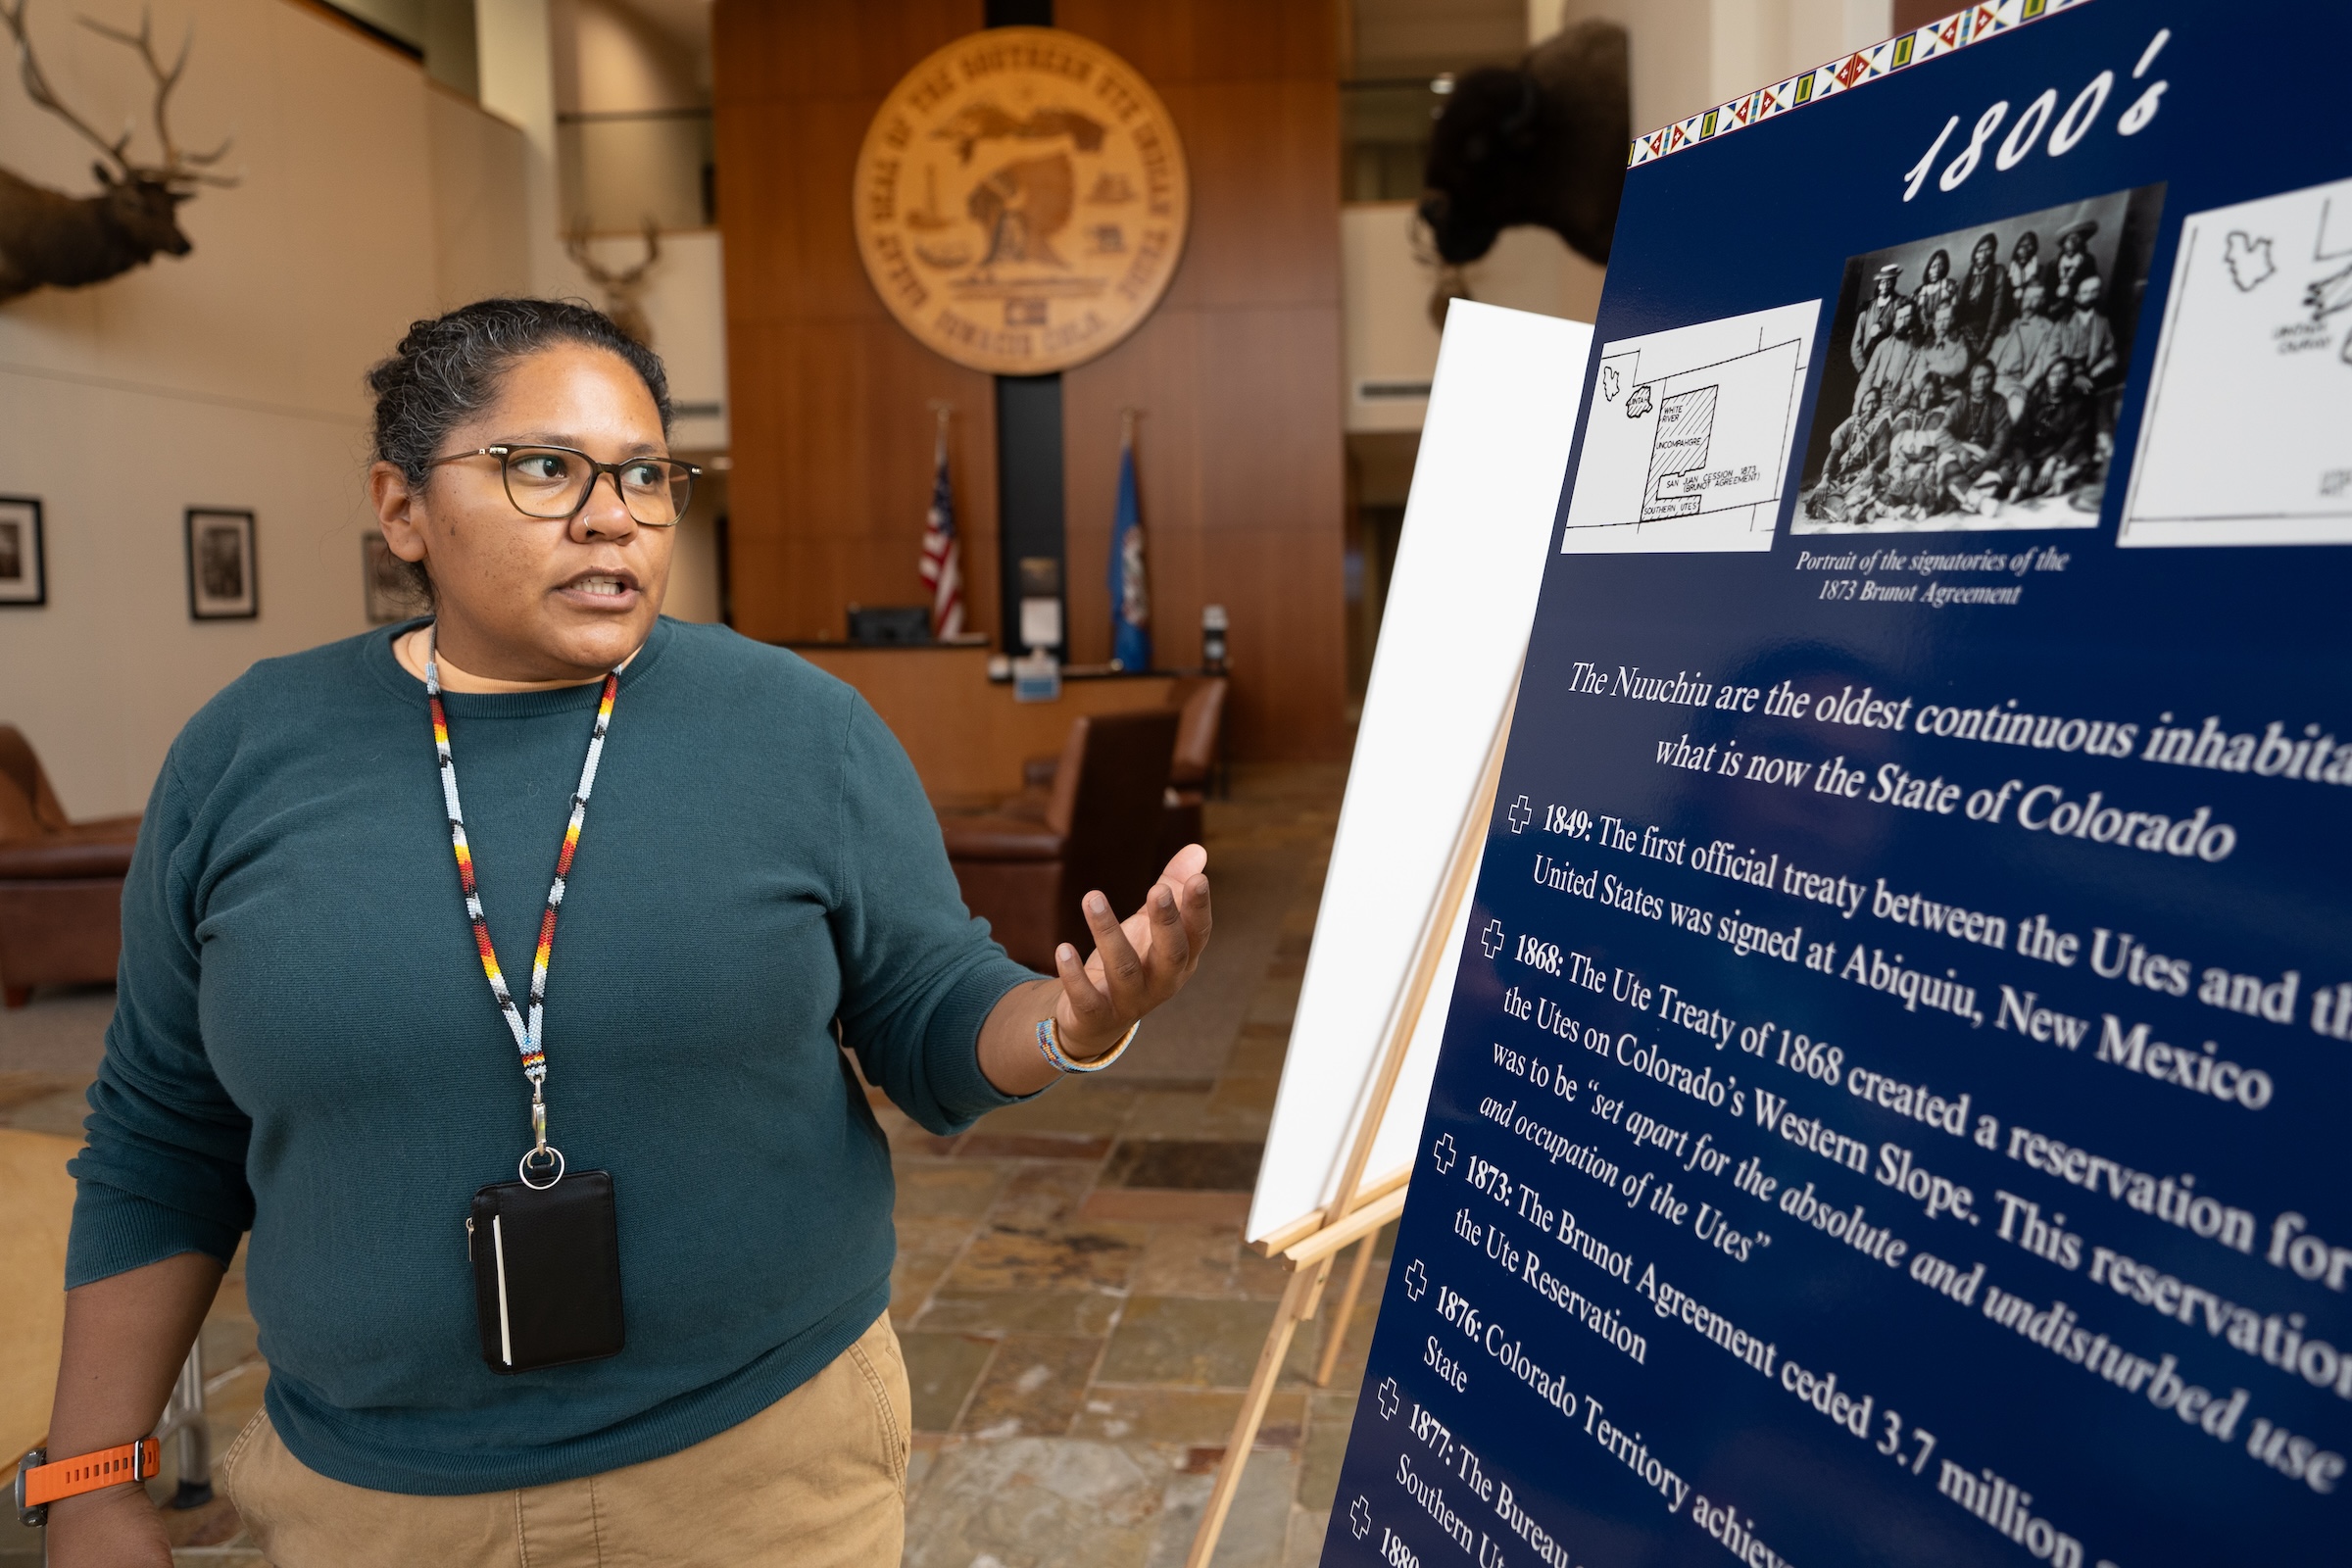 A person stands next to a display board on Ute history, gesturing while explaining. The board includes historical details about the Ute Tribe in Colorado.